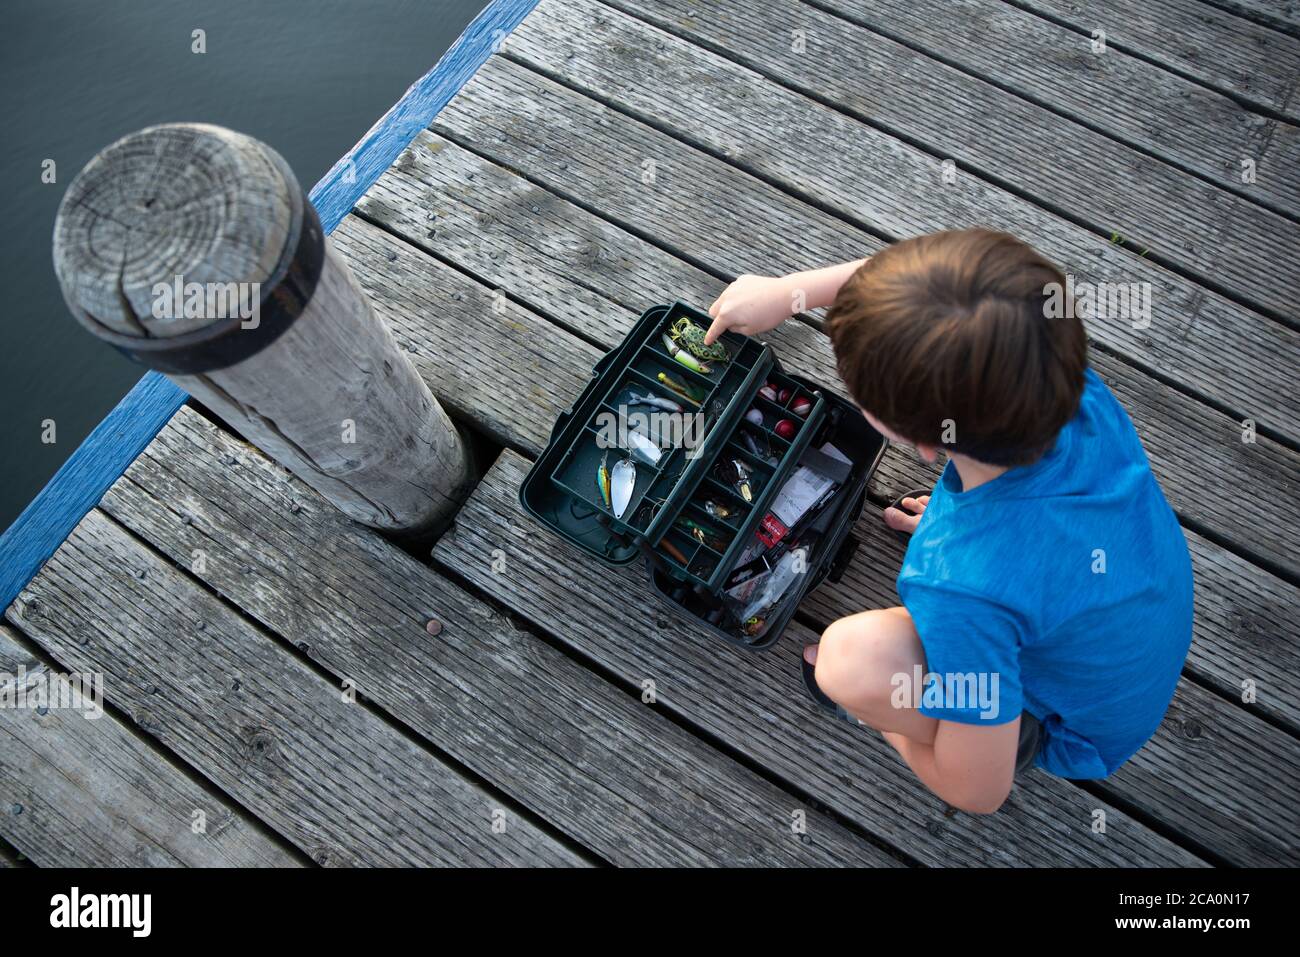 https://c8.alamy.com/comp/2CA0N17/young-boy-looking-through-a-fishing-tackle-box-on-a-wooden-dock-2CA0N17.jpg